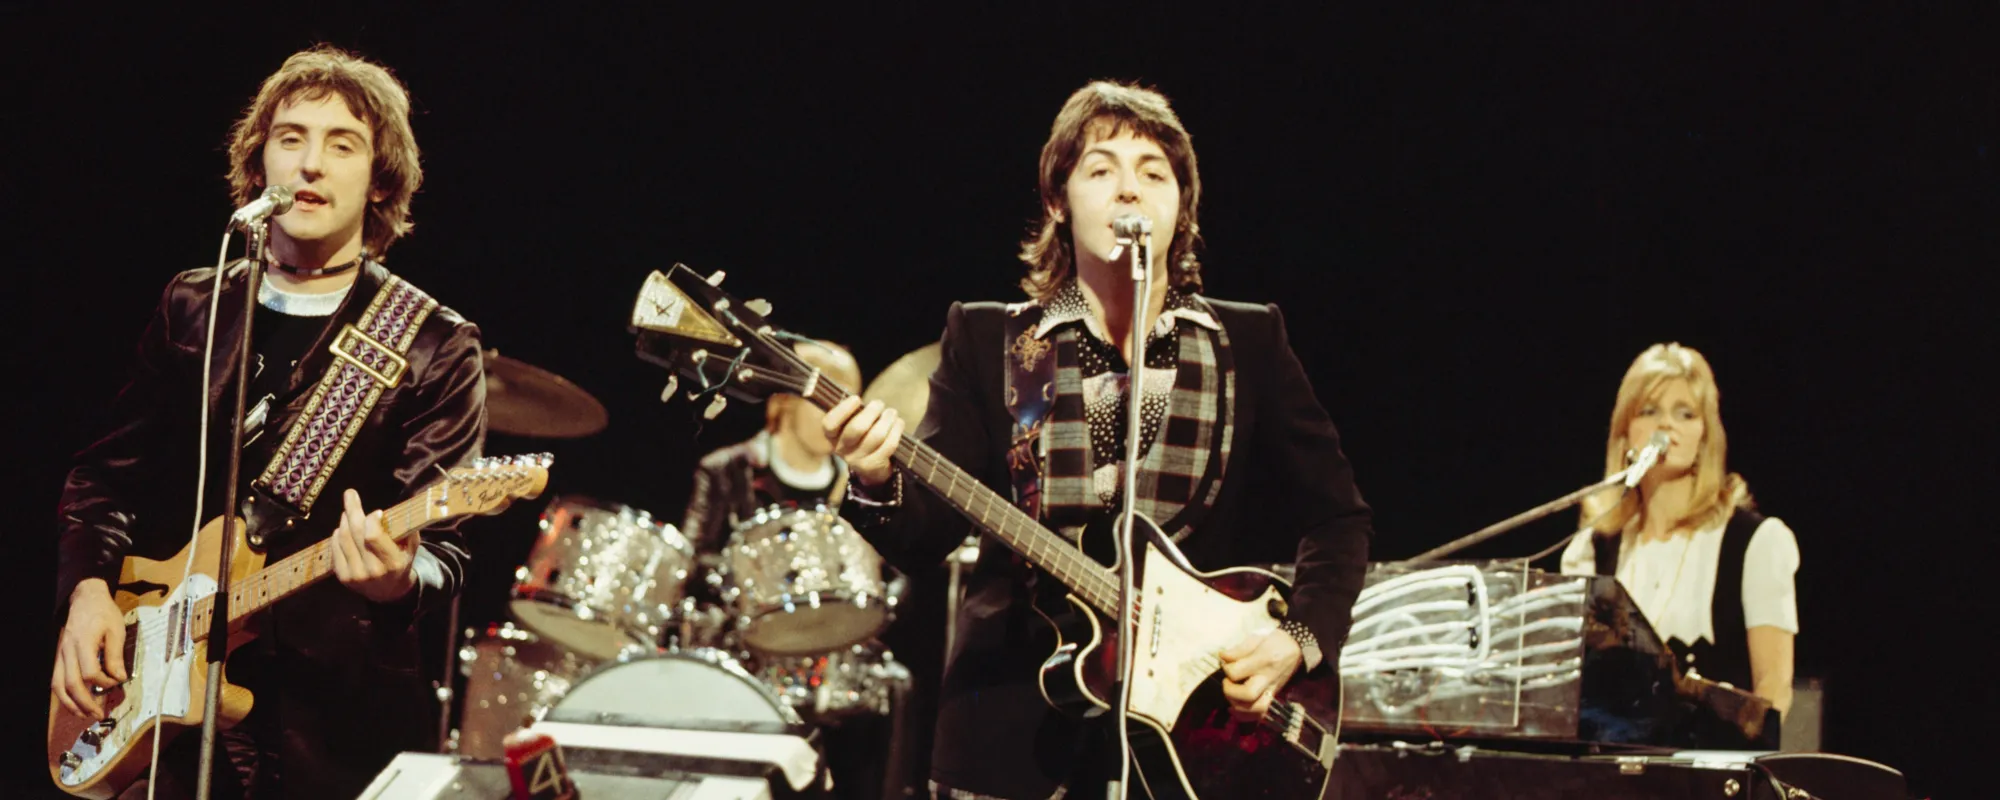 The Meaning Behind “Helen Wheels” by Paul McCartney and Wings and How It Introduced the Three-Piece Version of the Band to the World